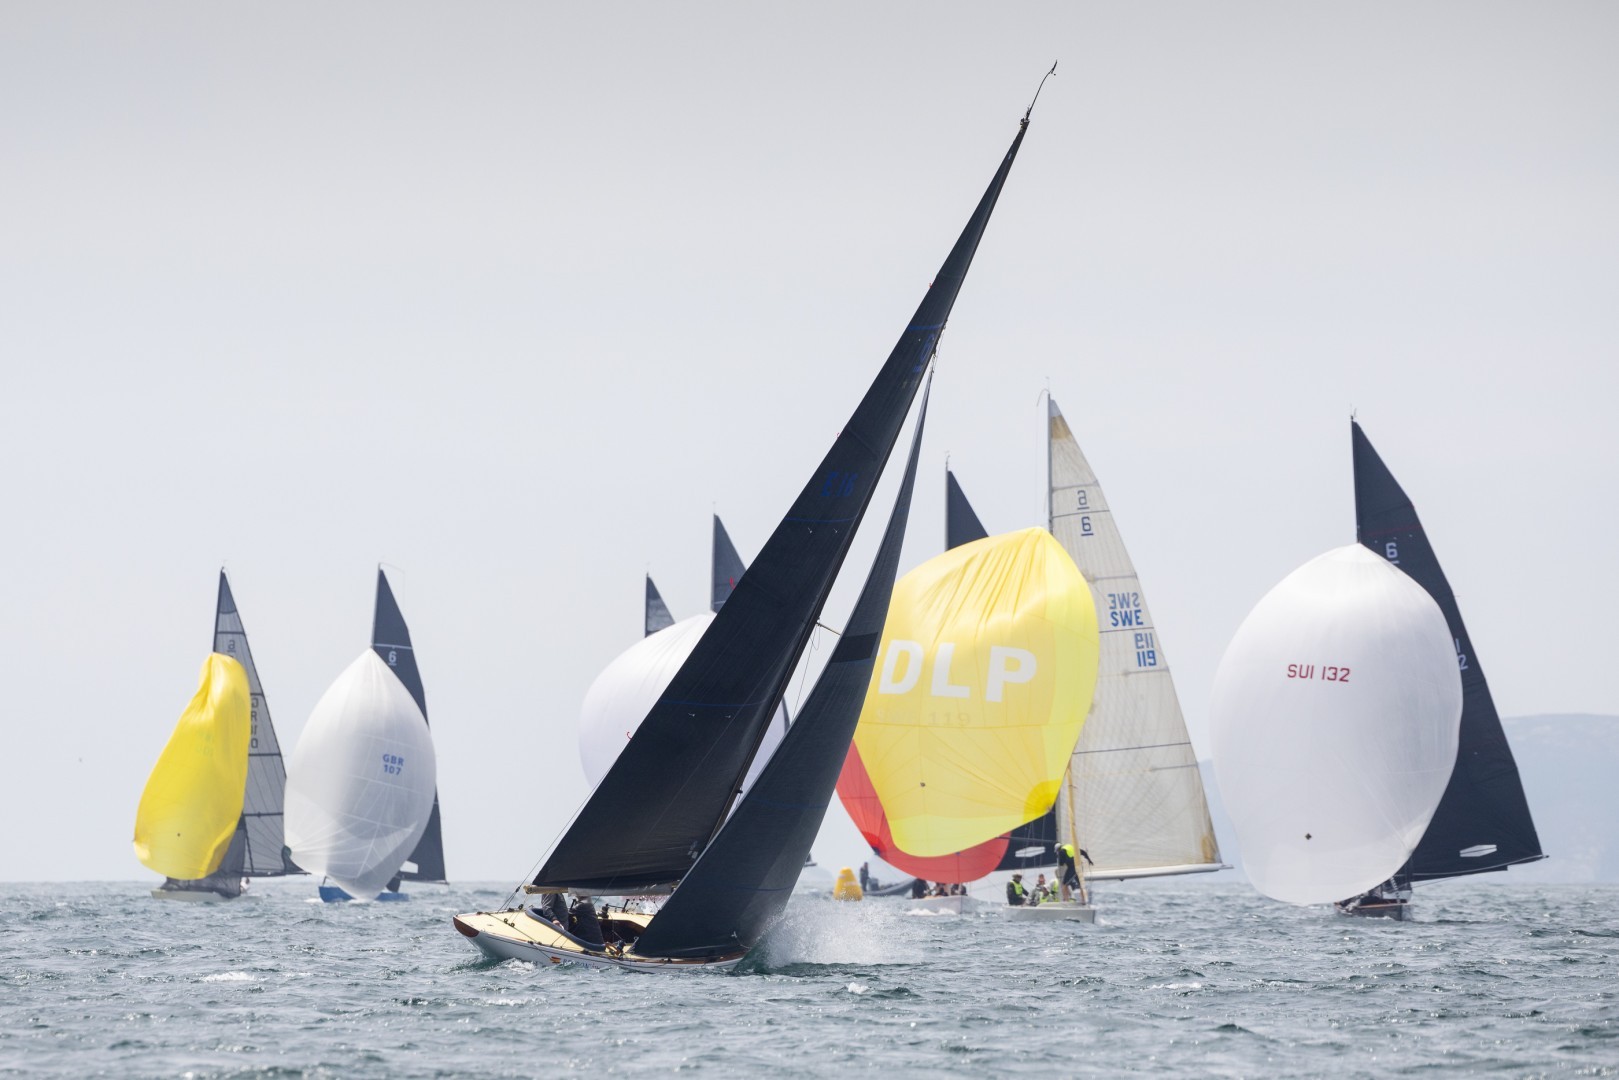 Bribon 500 and Momo dominate day one of the Xacobeo 6mR Worlds